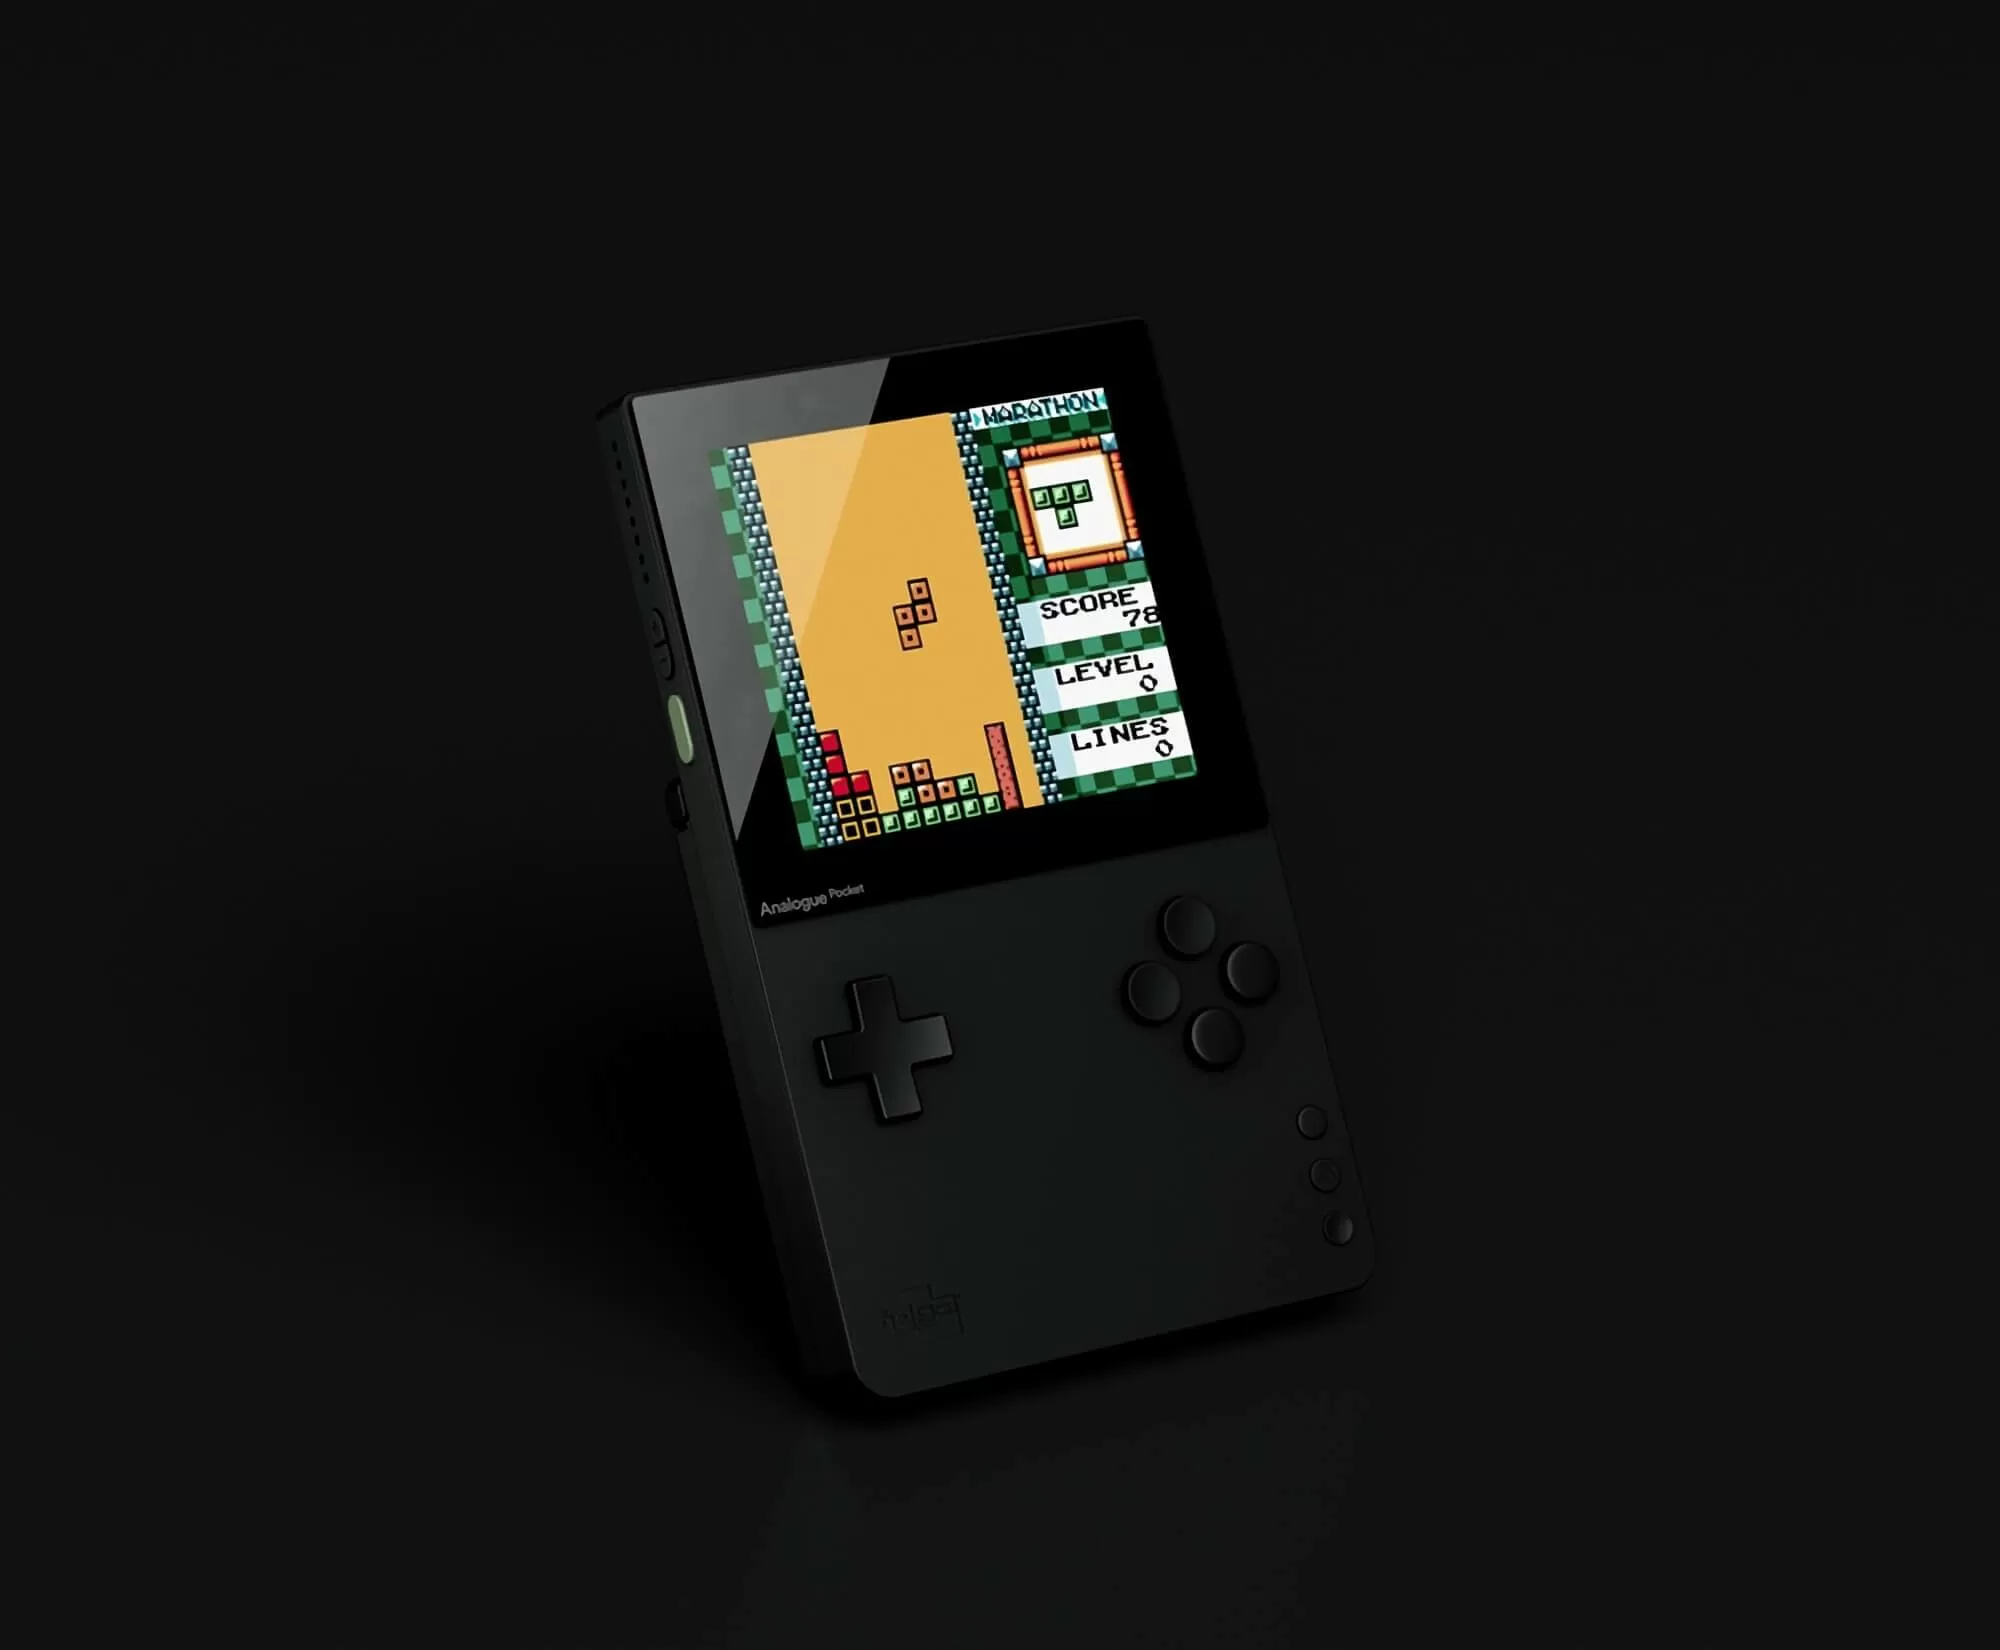 Analogue Pocket retro-gaming handheld can play titles from six old-school portables